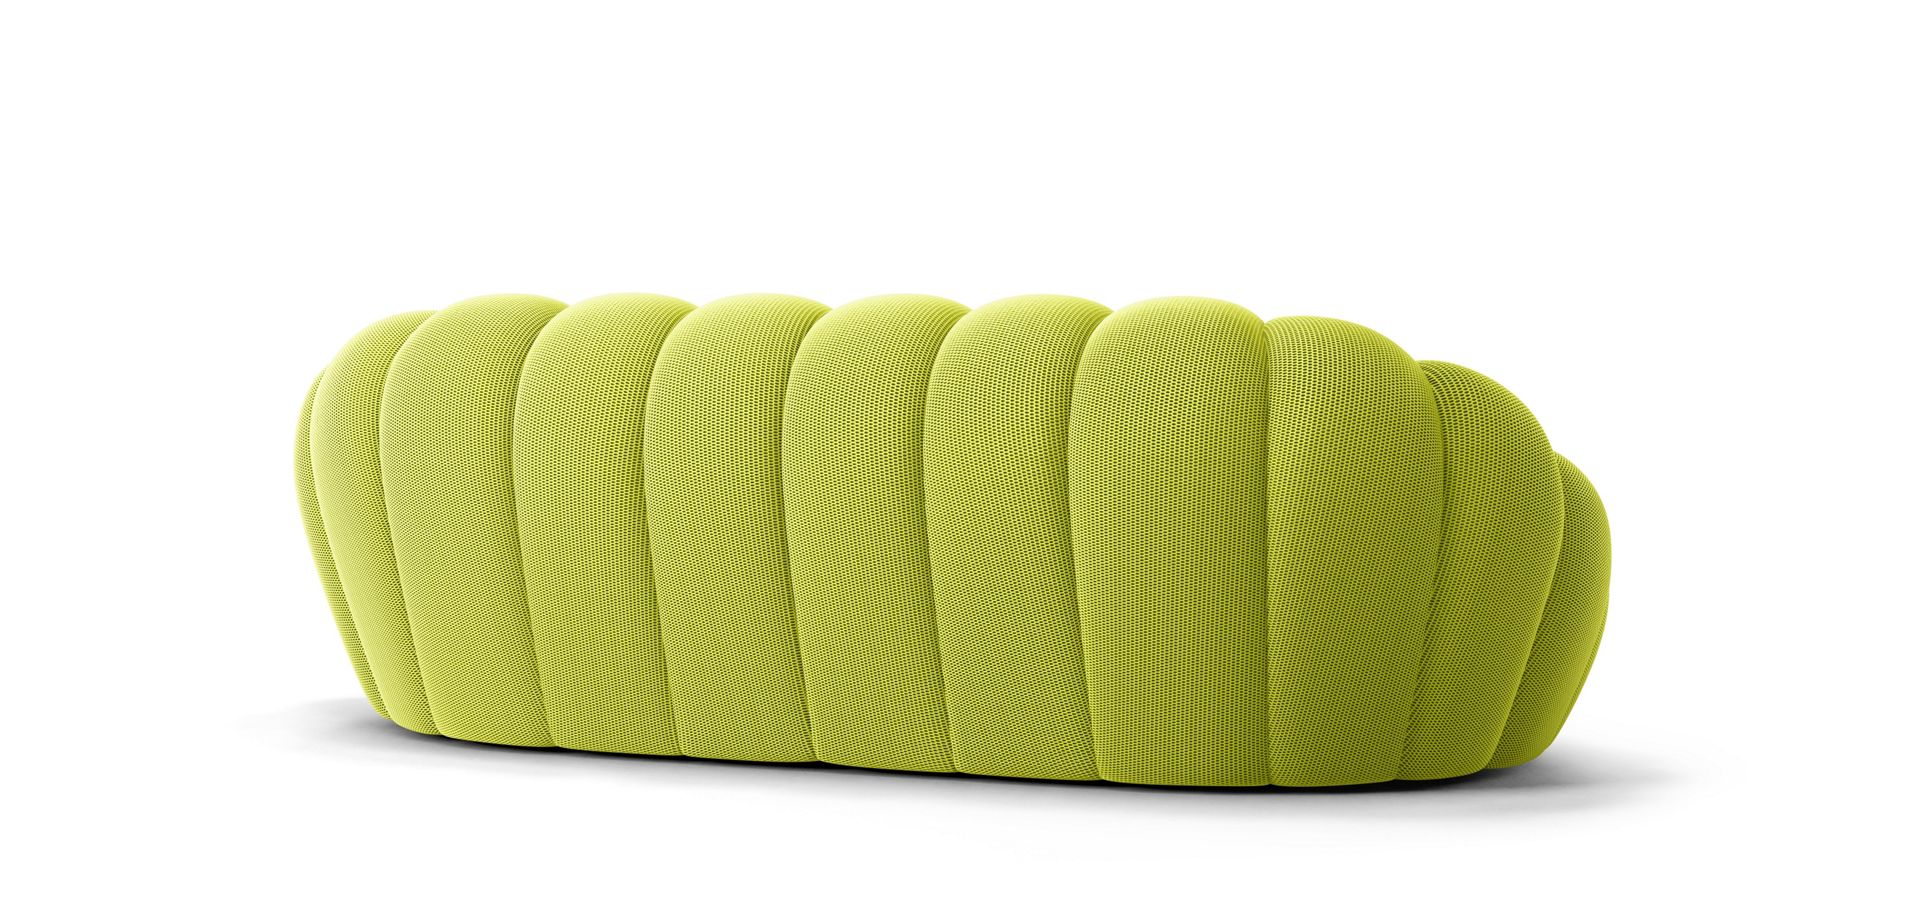 large 3-seat sofa - techno 3D image number 12